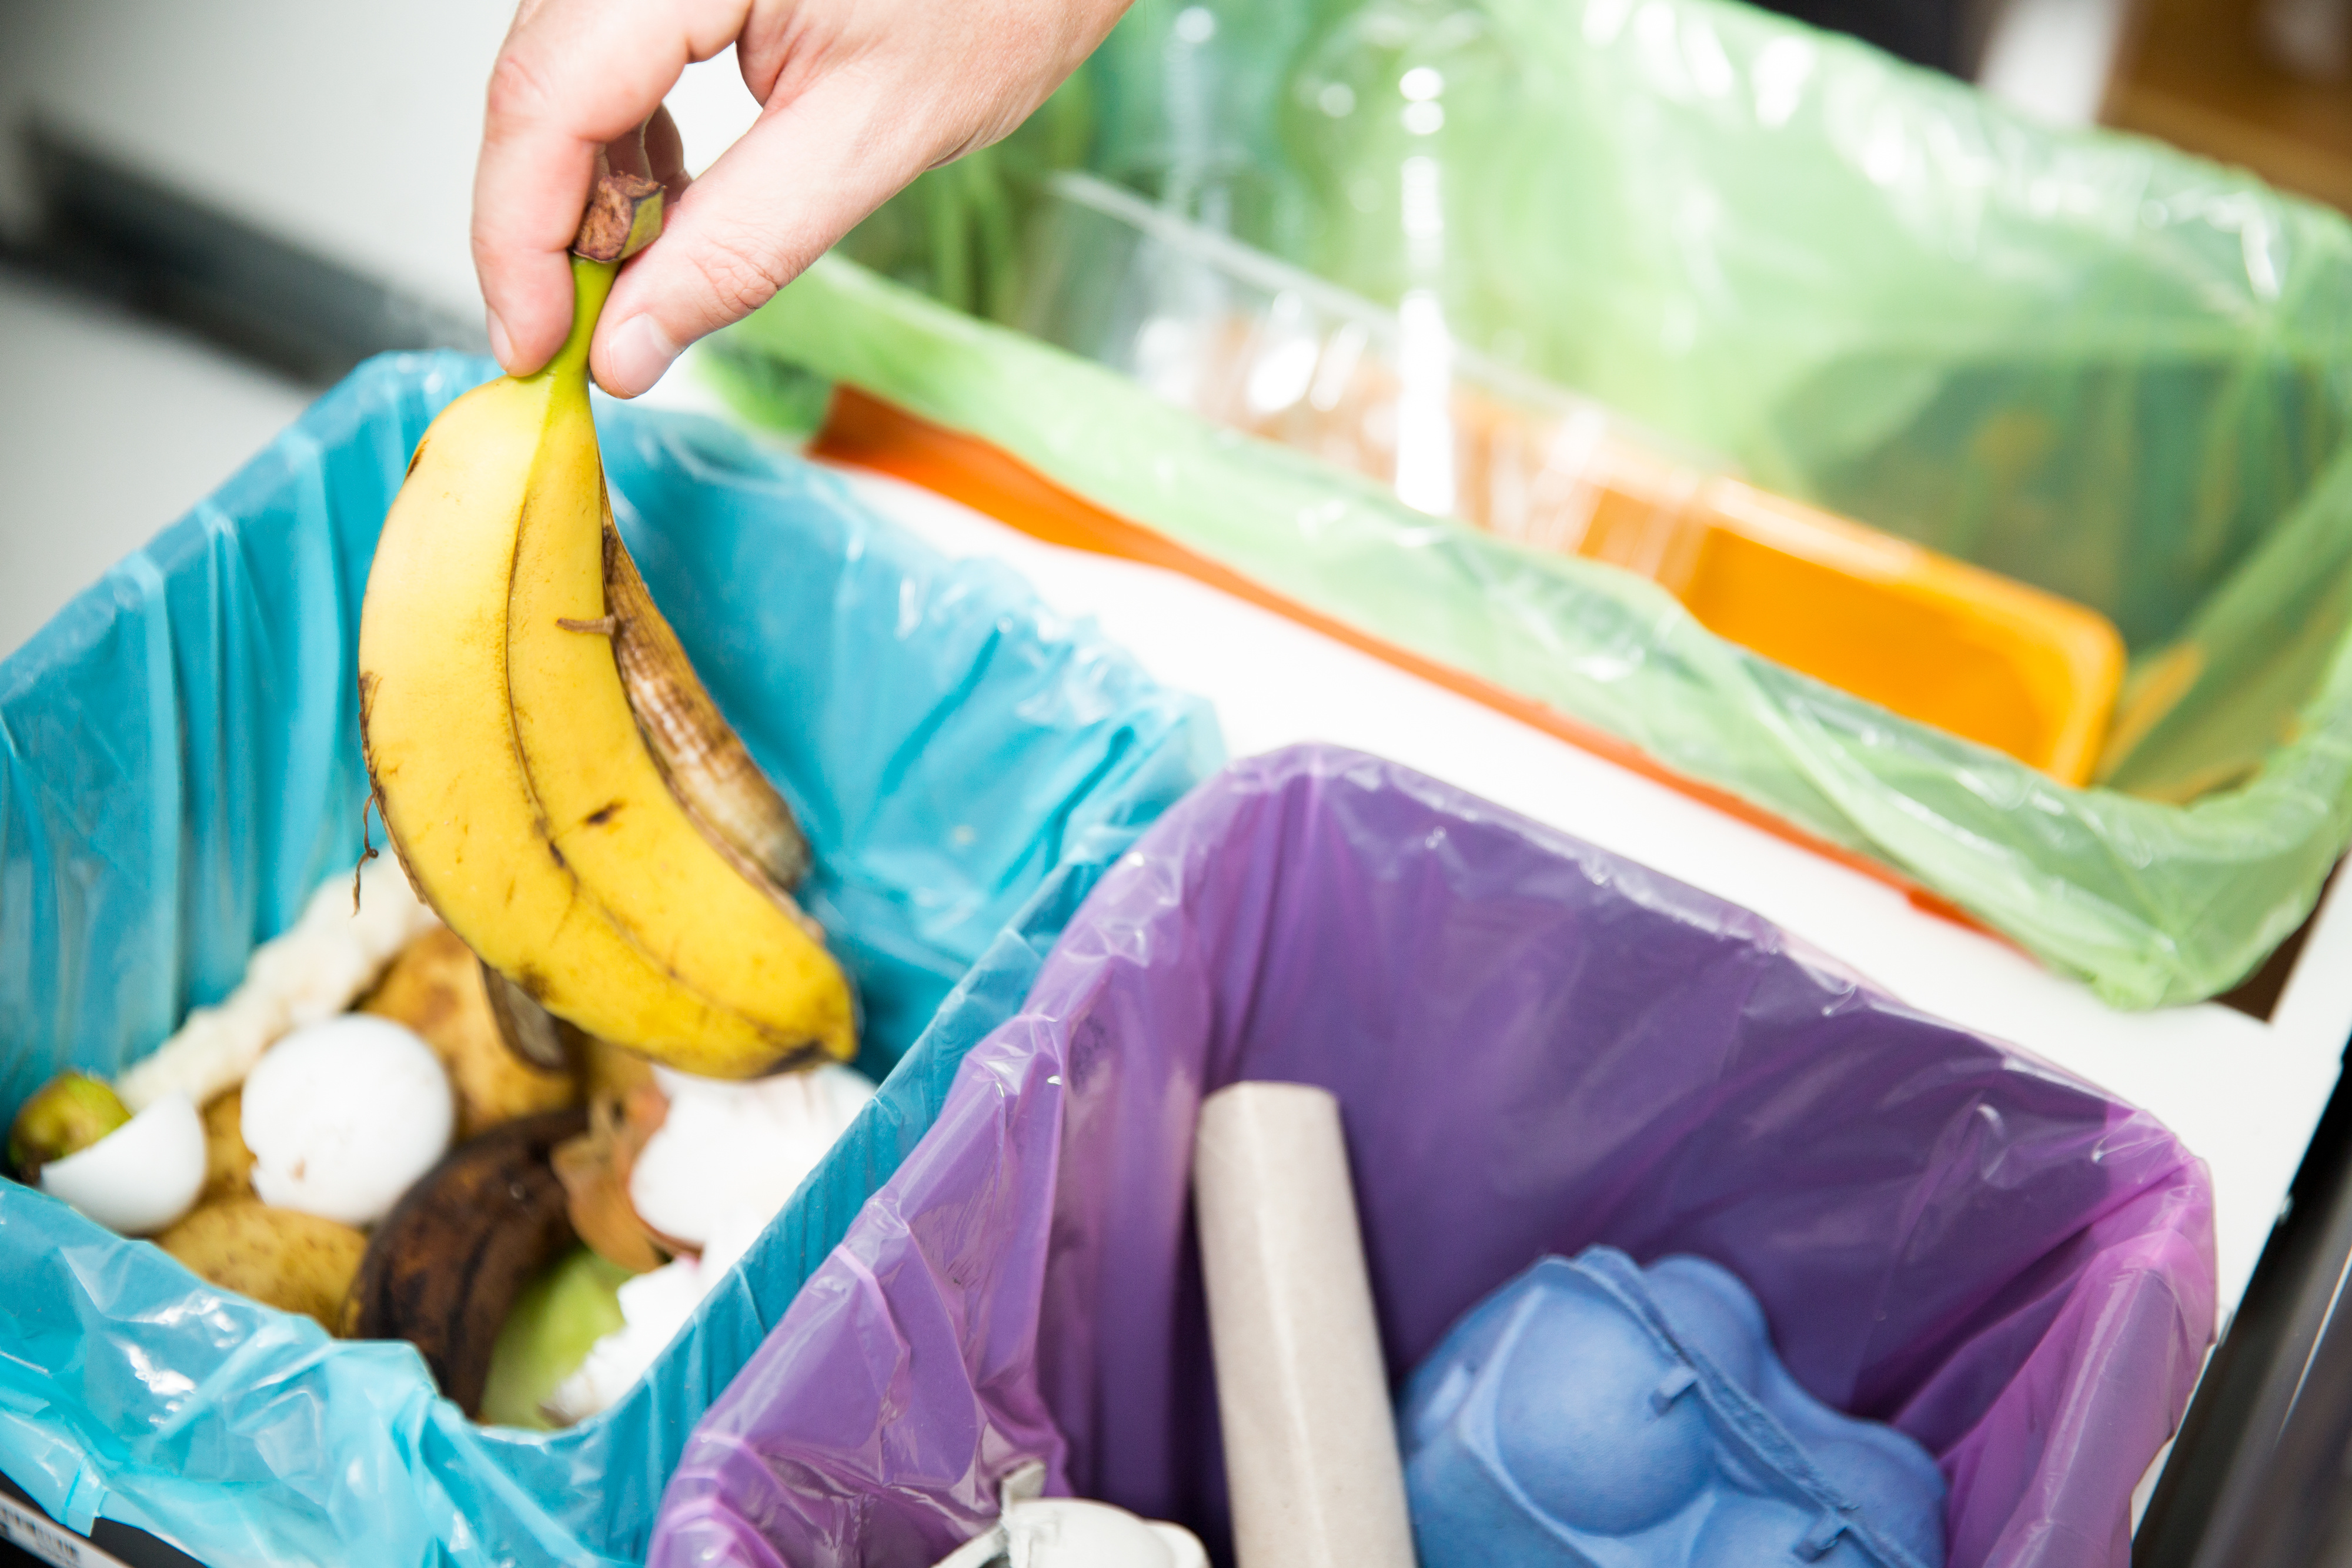 How can you reduce food waste?